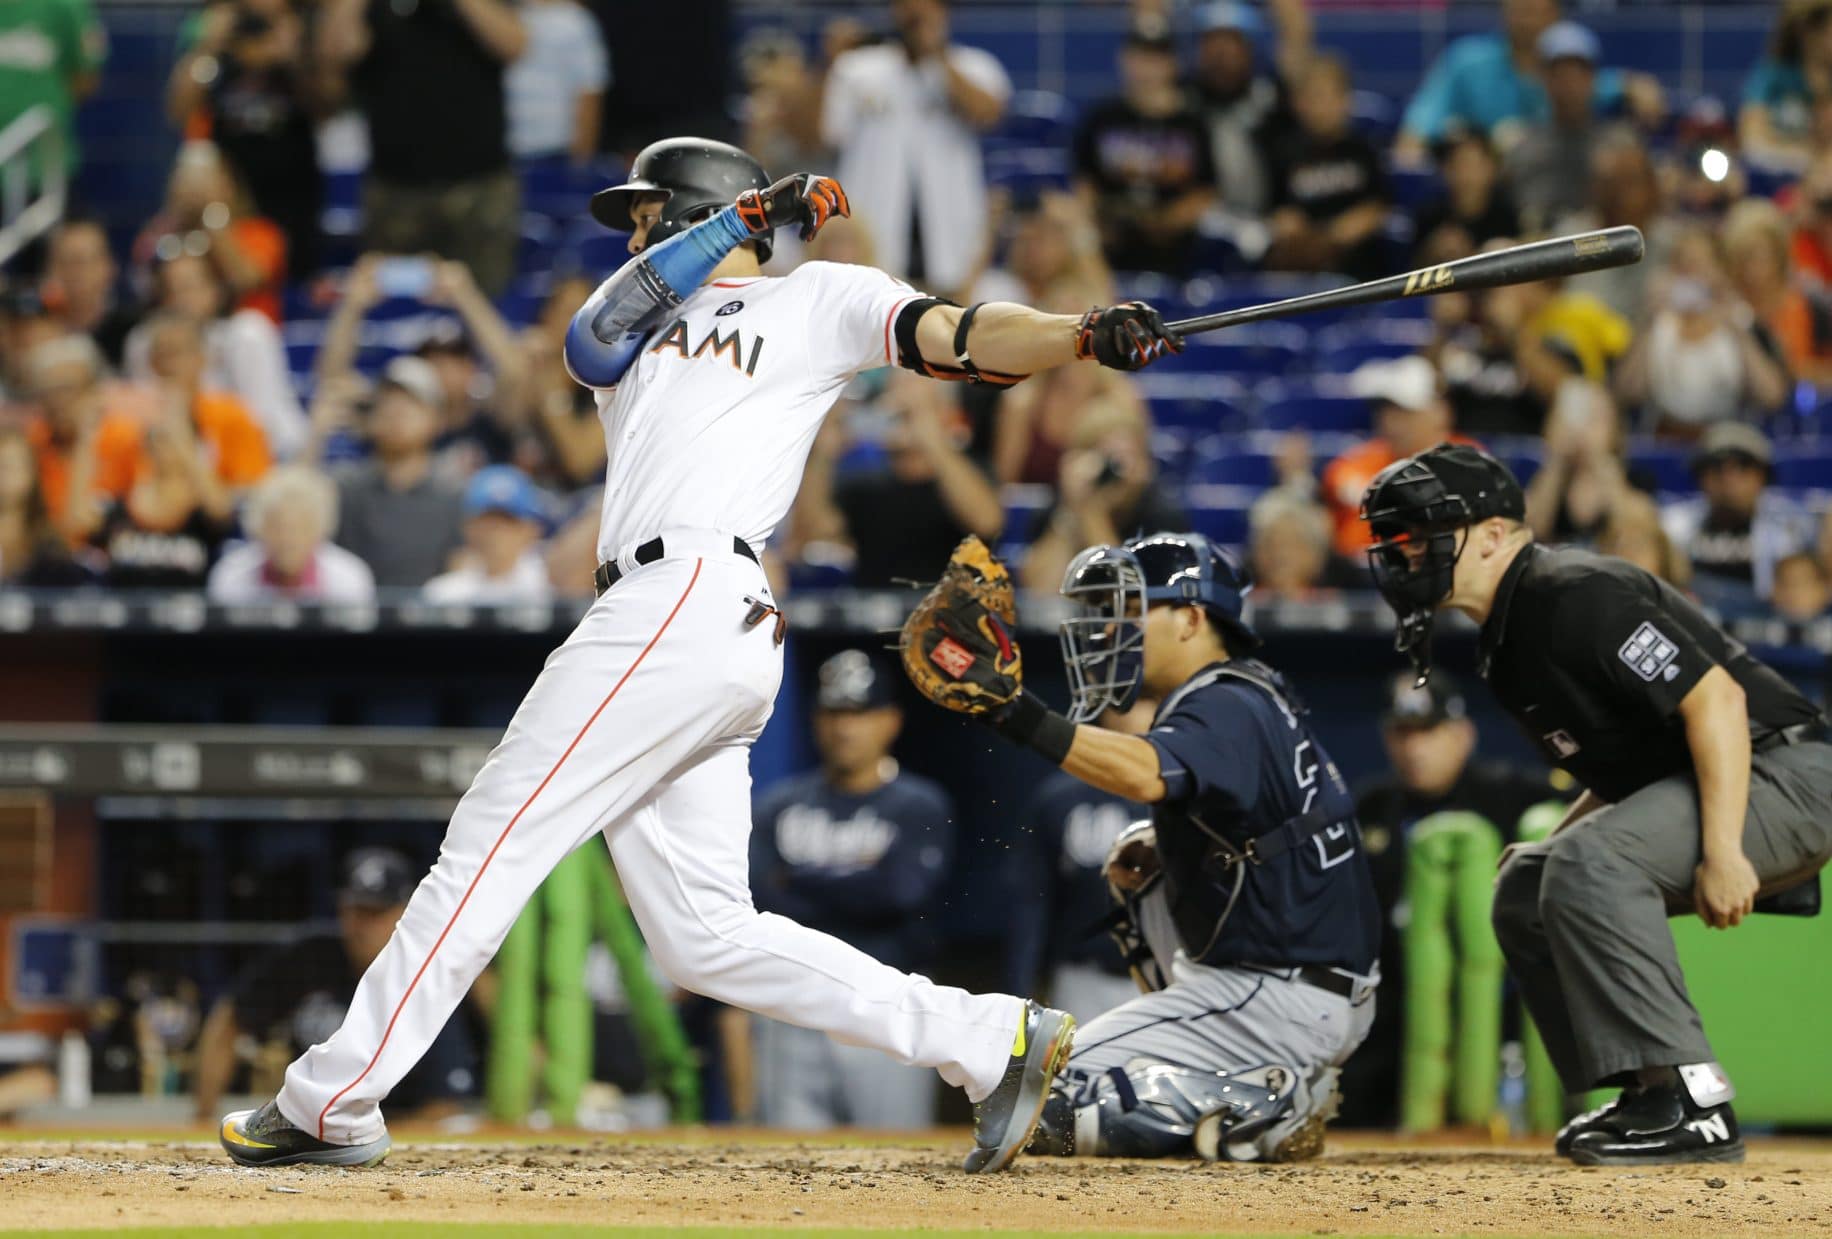 The Great Stan-tino: The New York Yankees and Giancarlo Stanton a reality?